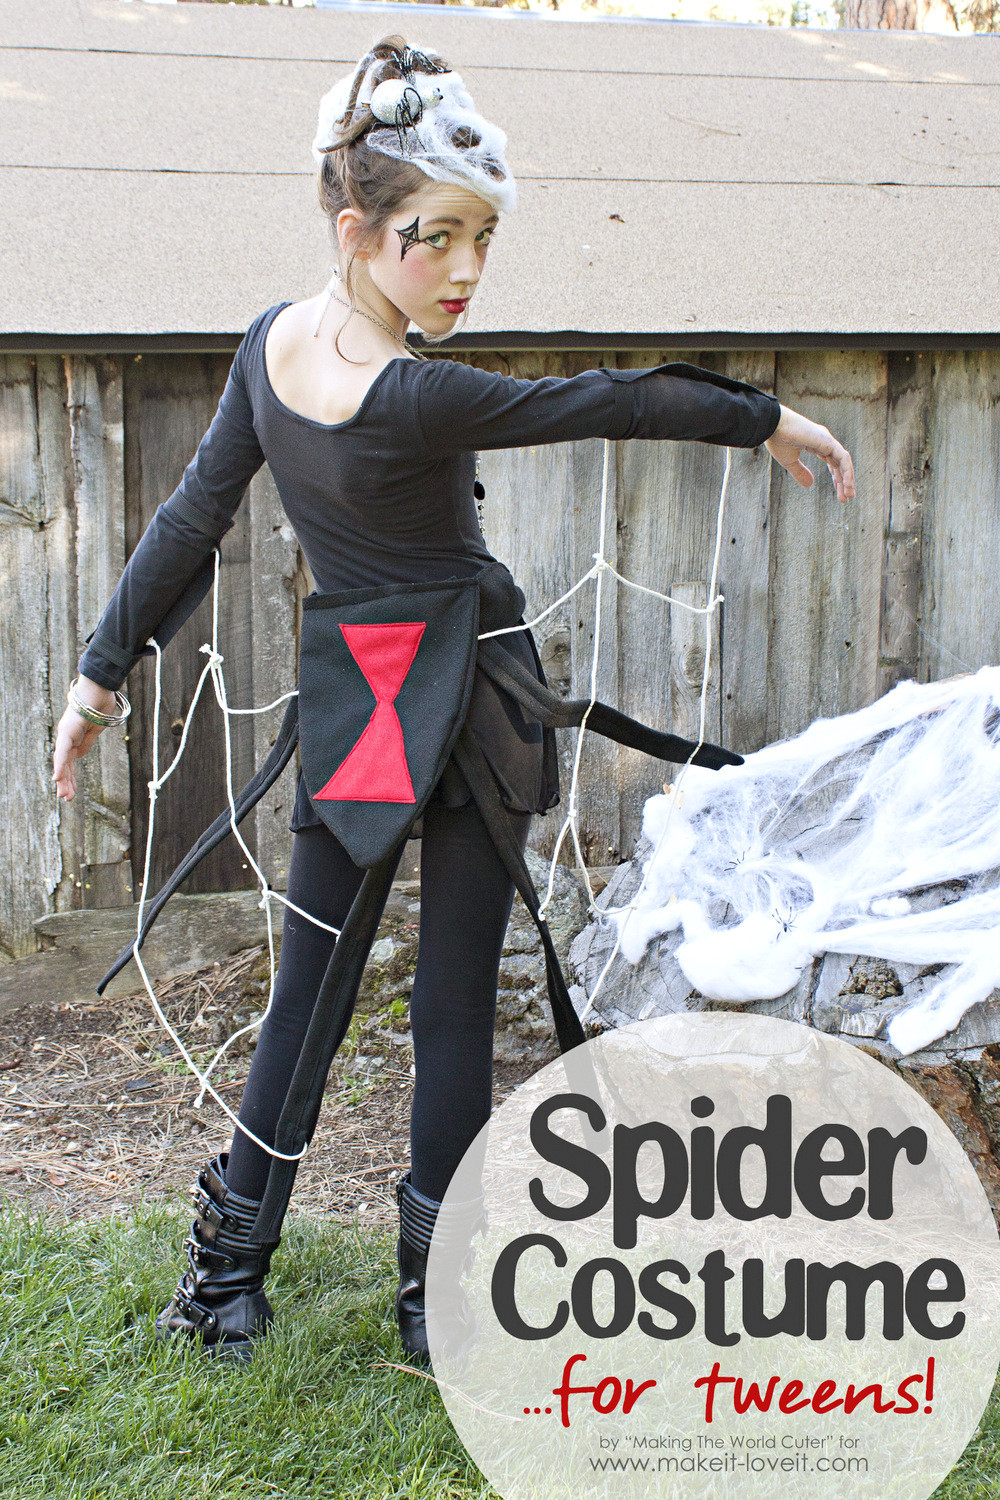 Spider Costume DIY
 DIY Spider Costume for Tweens Teens or any age really